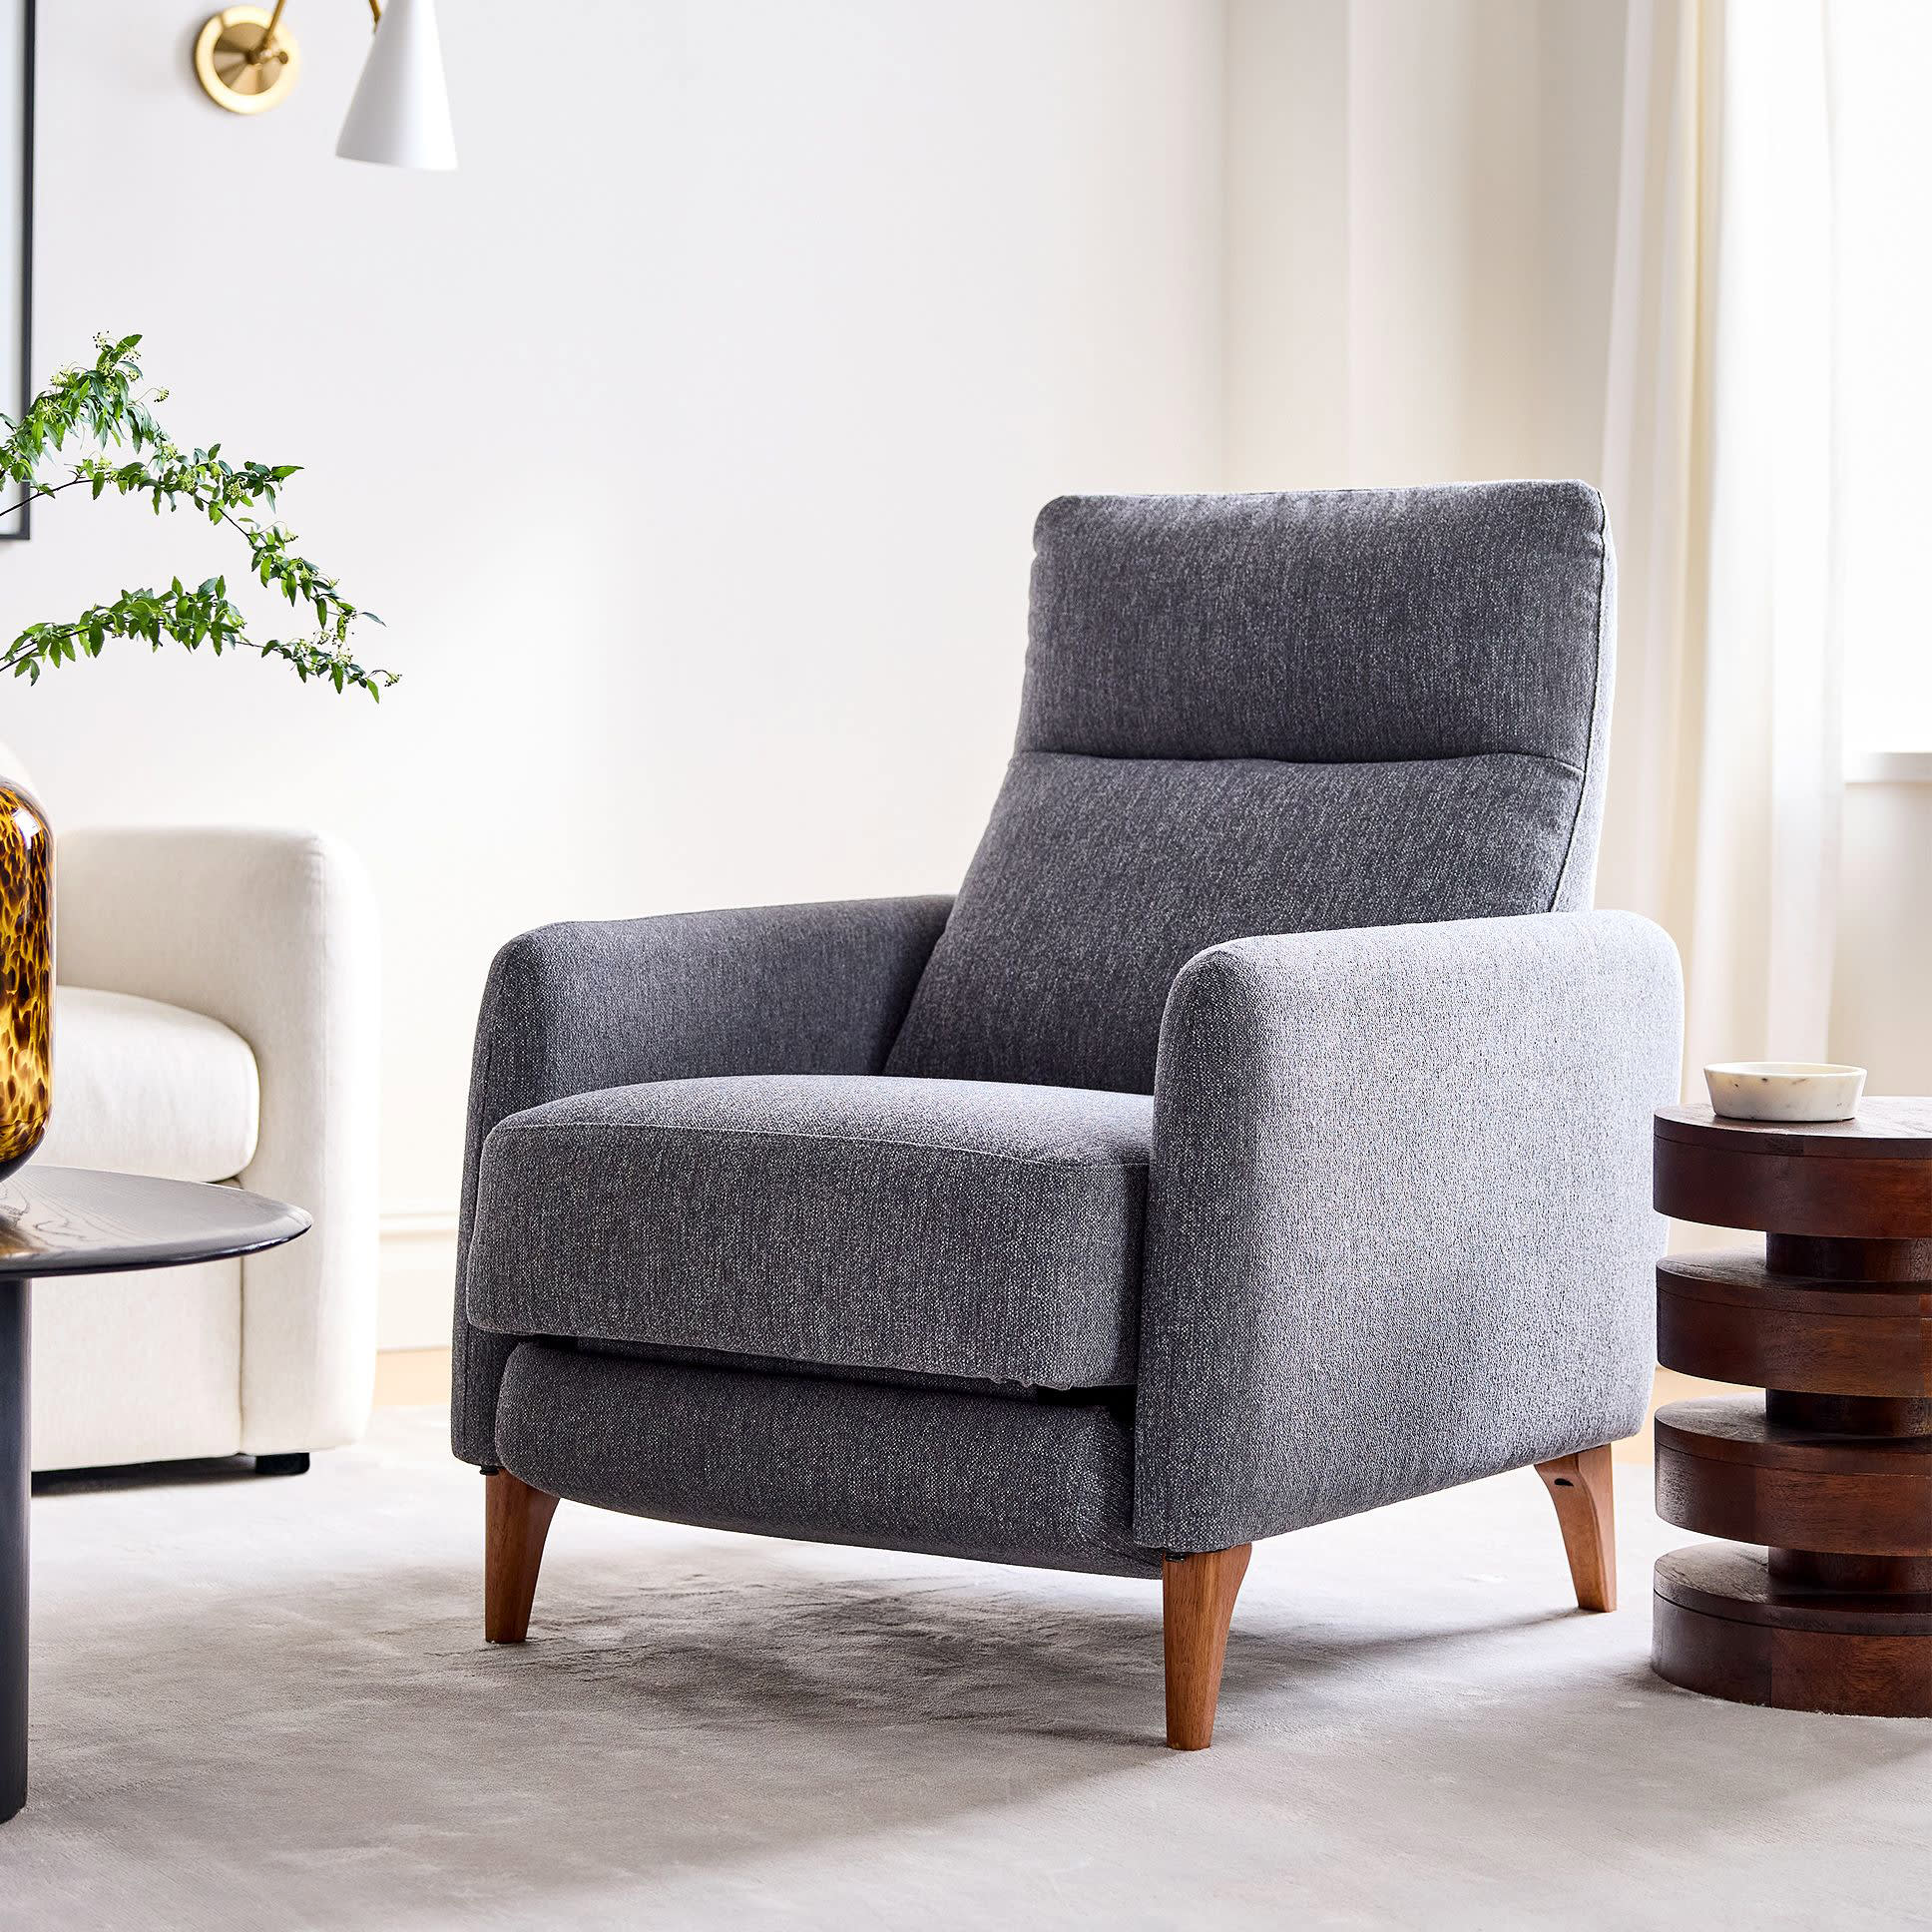 http://cdn.apartmenttherapy.info/image/upload/v1687366939/commerce/product-roundups/2023/2023-06-comfortable-chairs-small-spaces/west-elm-auburn-recliner.jpg